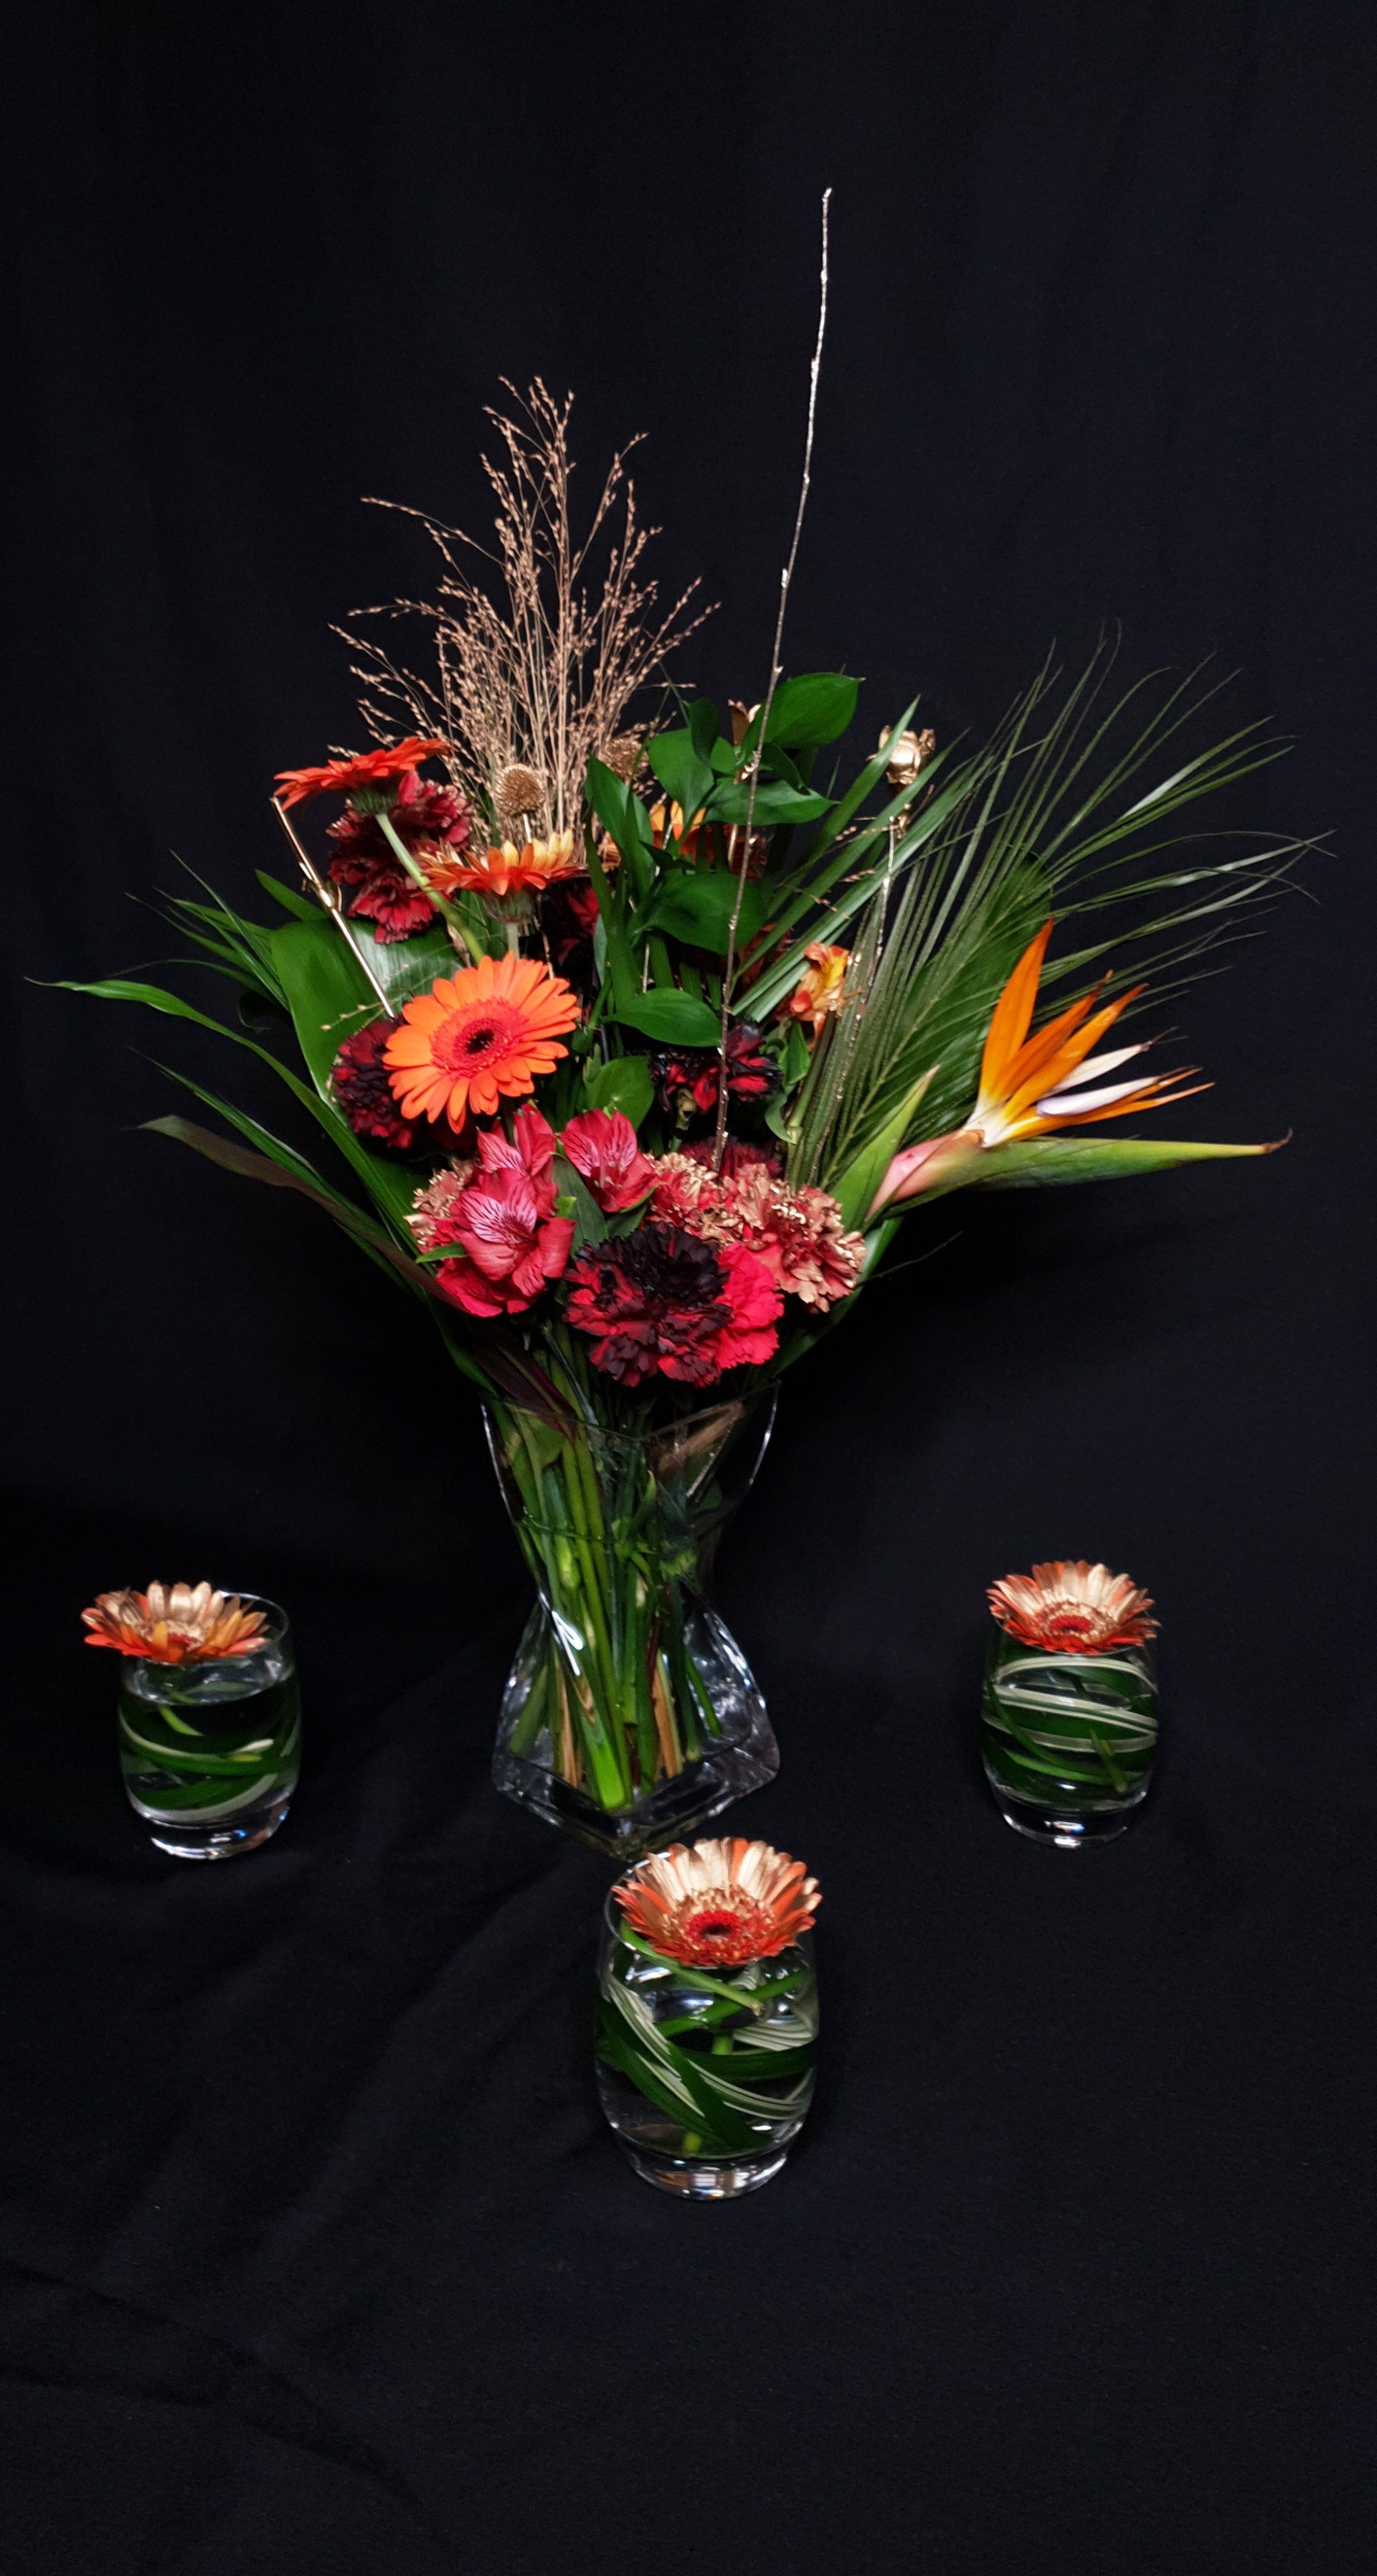 Gothic event flowers